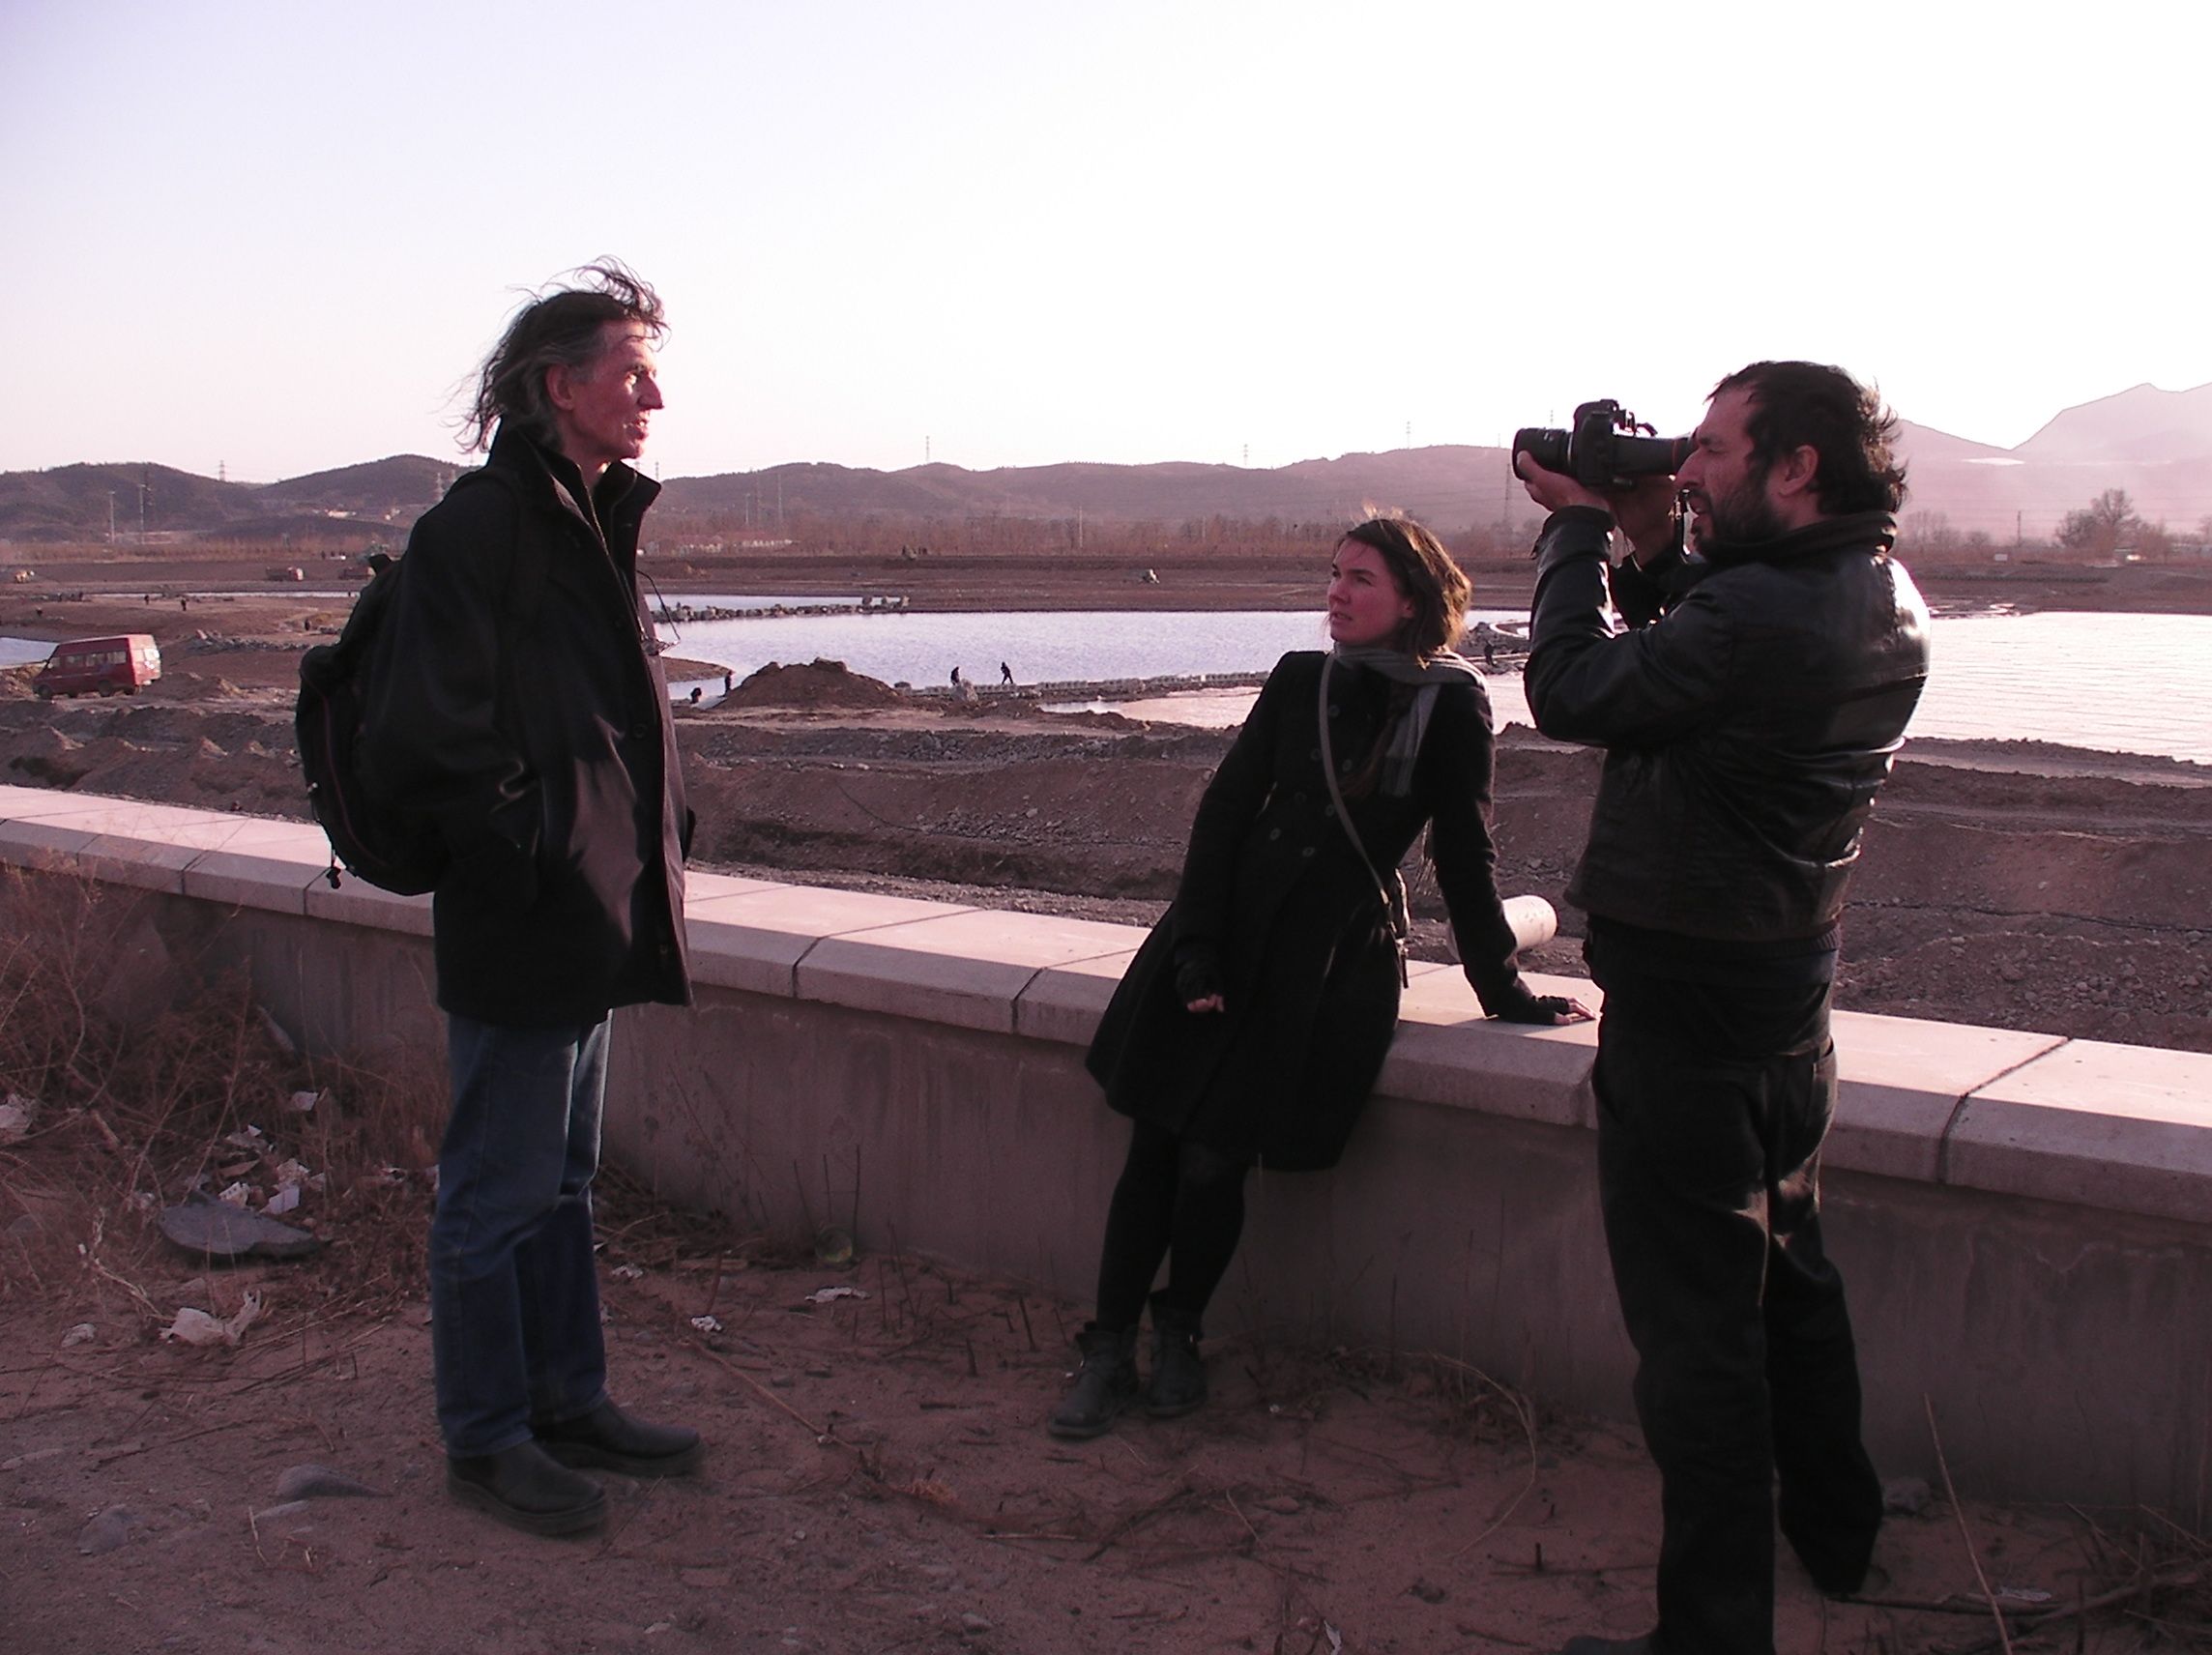 Shooting The Red House. Pictured with Francisco Rodriguez (camera) and Lee Stuart (cast). China, 2011.